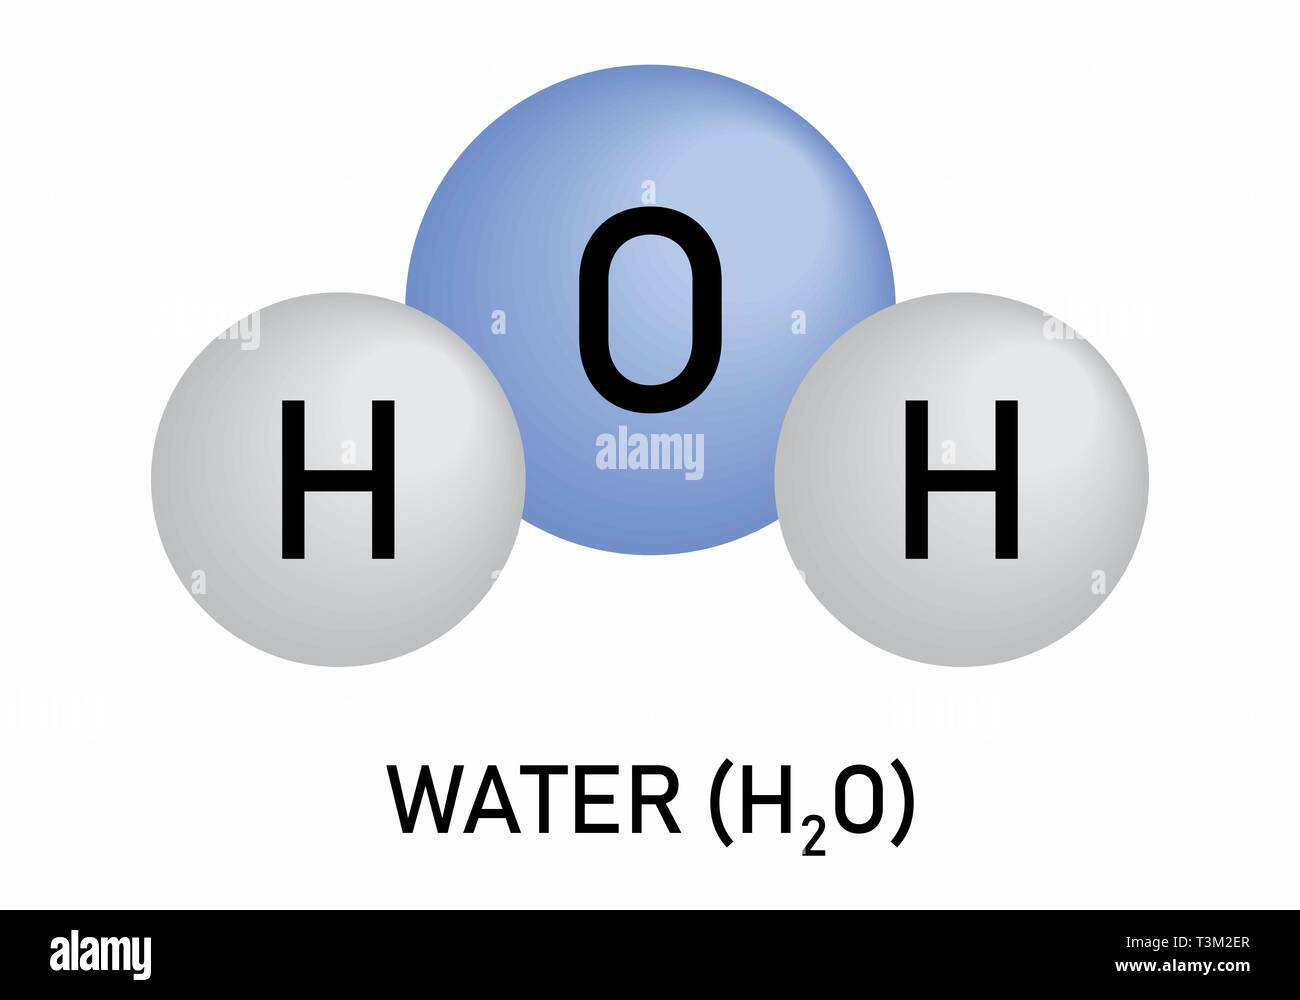 H2O. Illustration of Water molecule model on white background Stock Vector